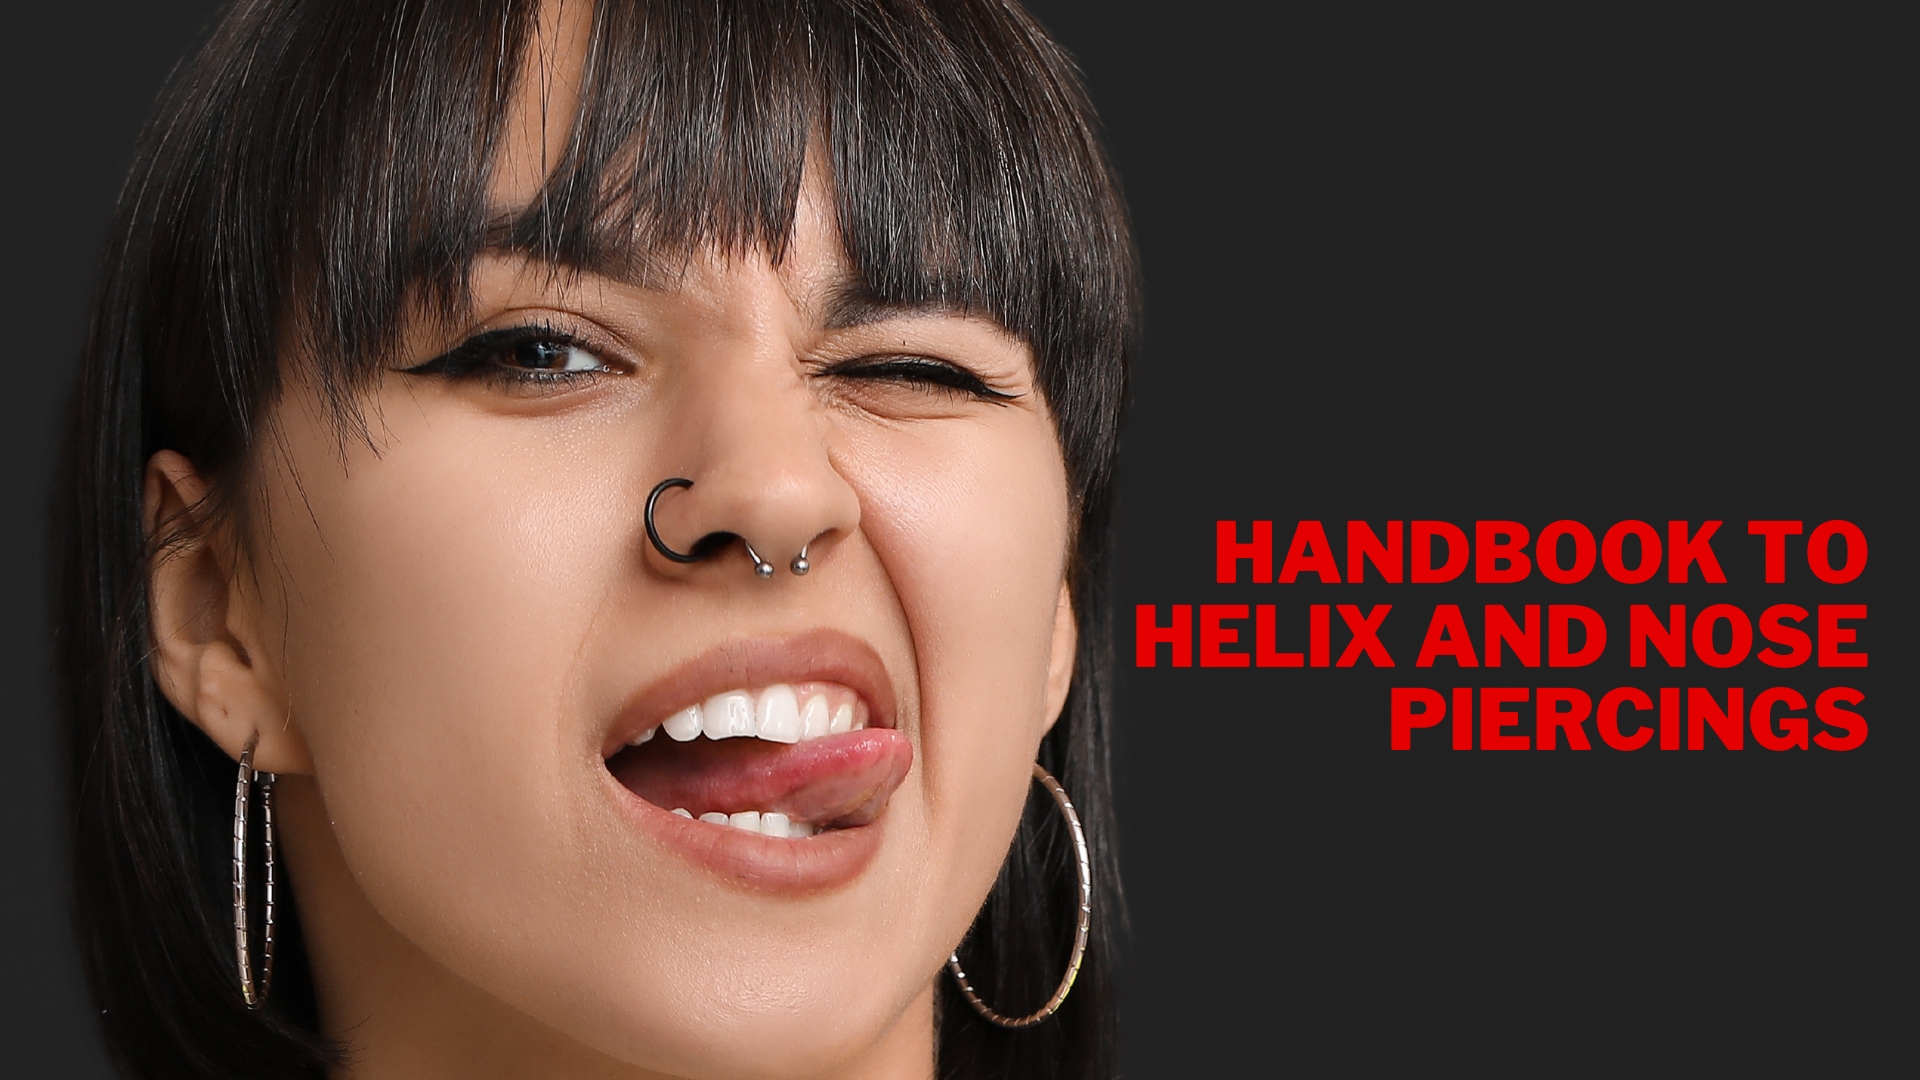 Your Handbook to Helix and Nose Piercings